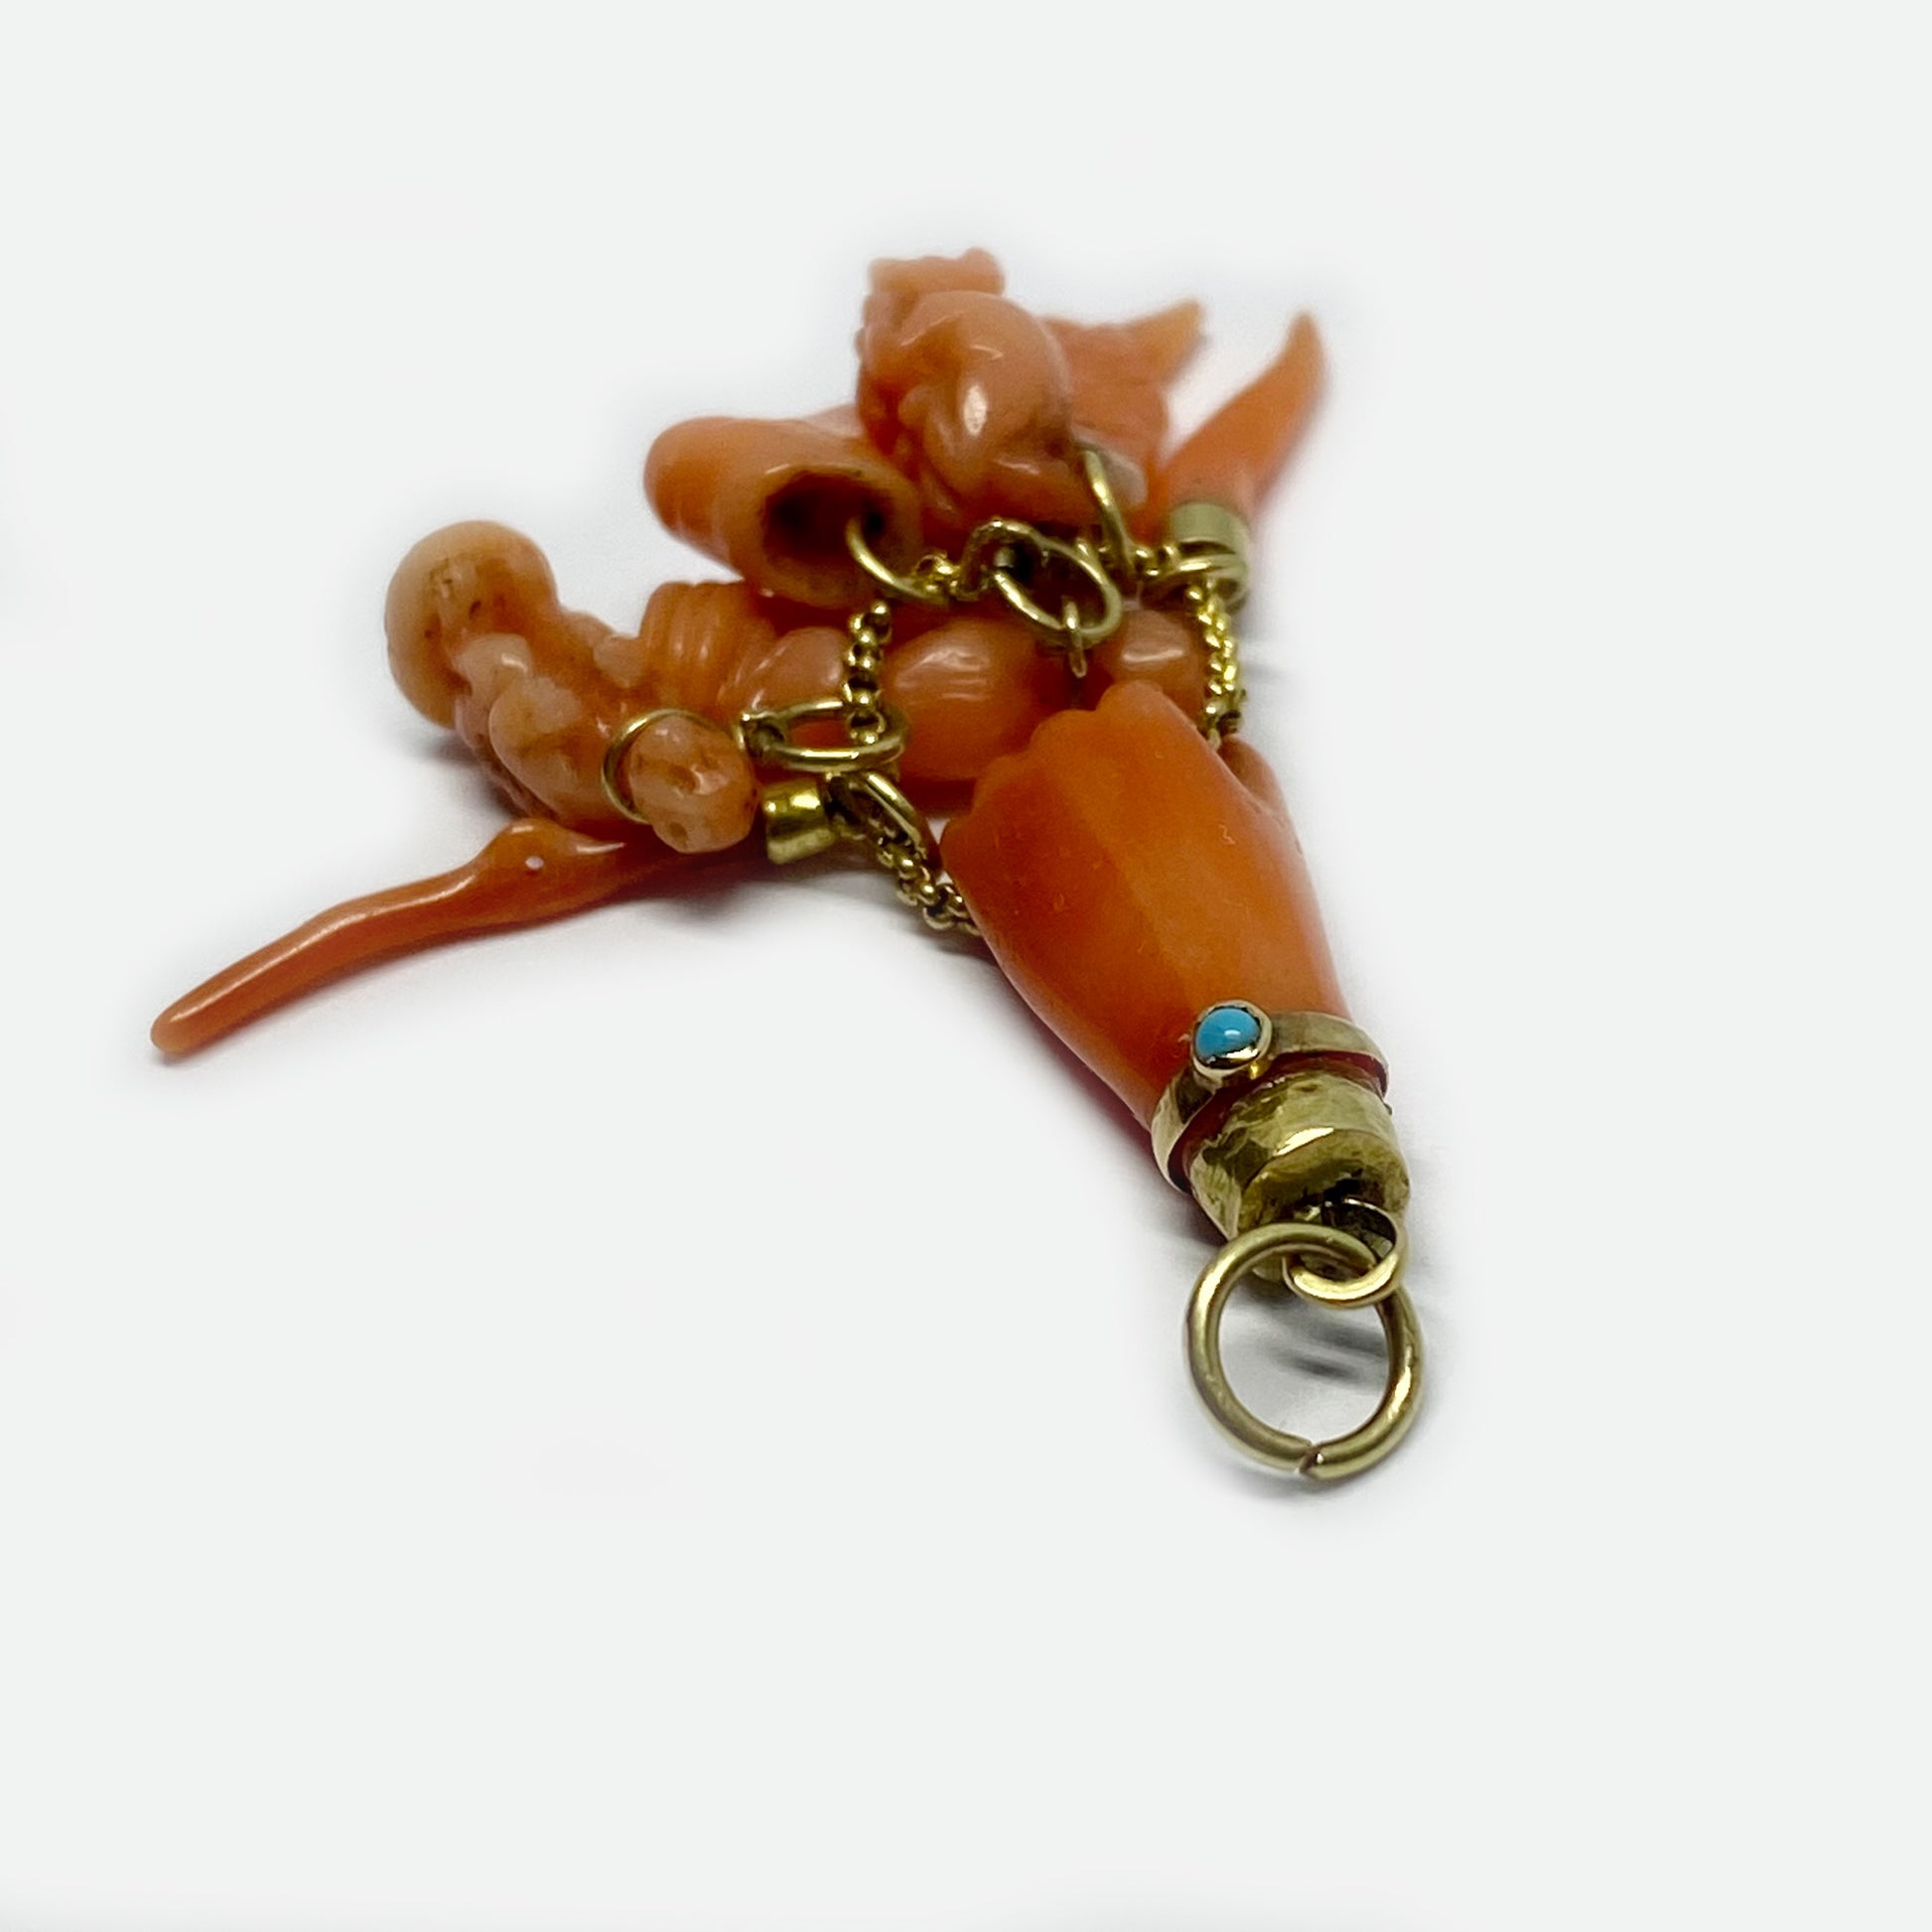 Antique Coral Hand Charm Holder Pendant of 14k Gold - Trademark